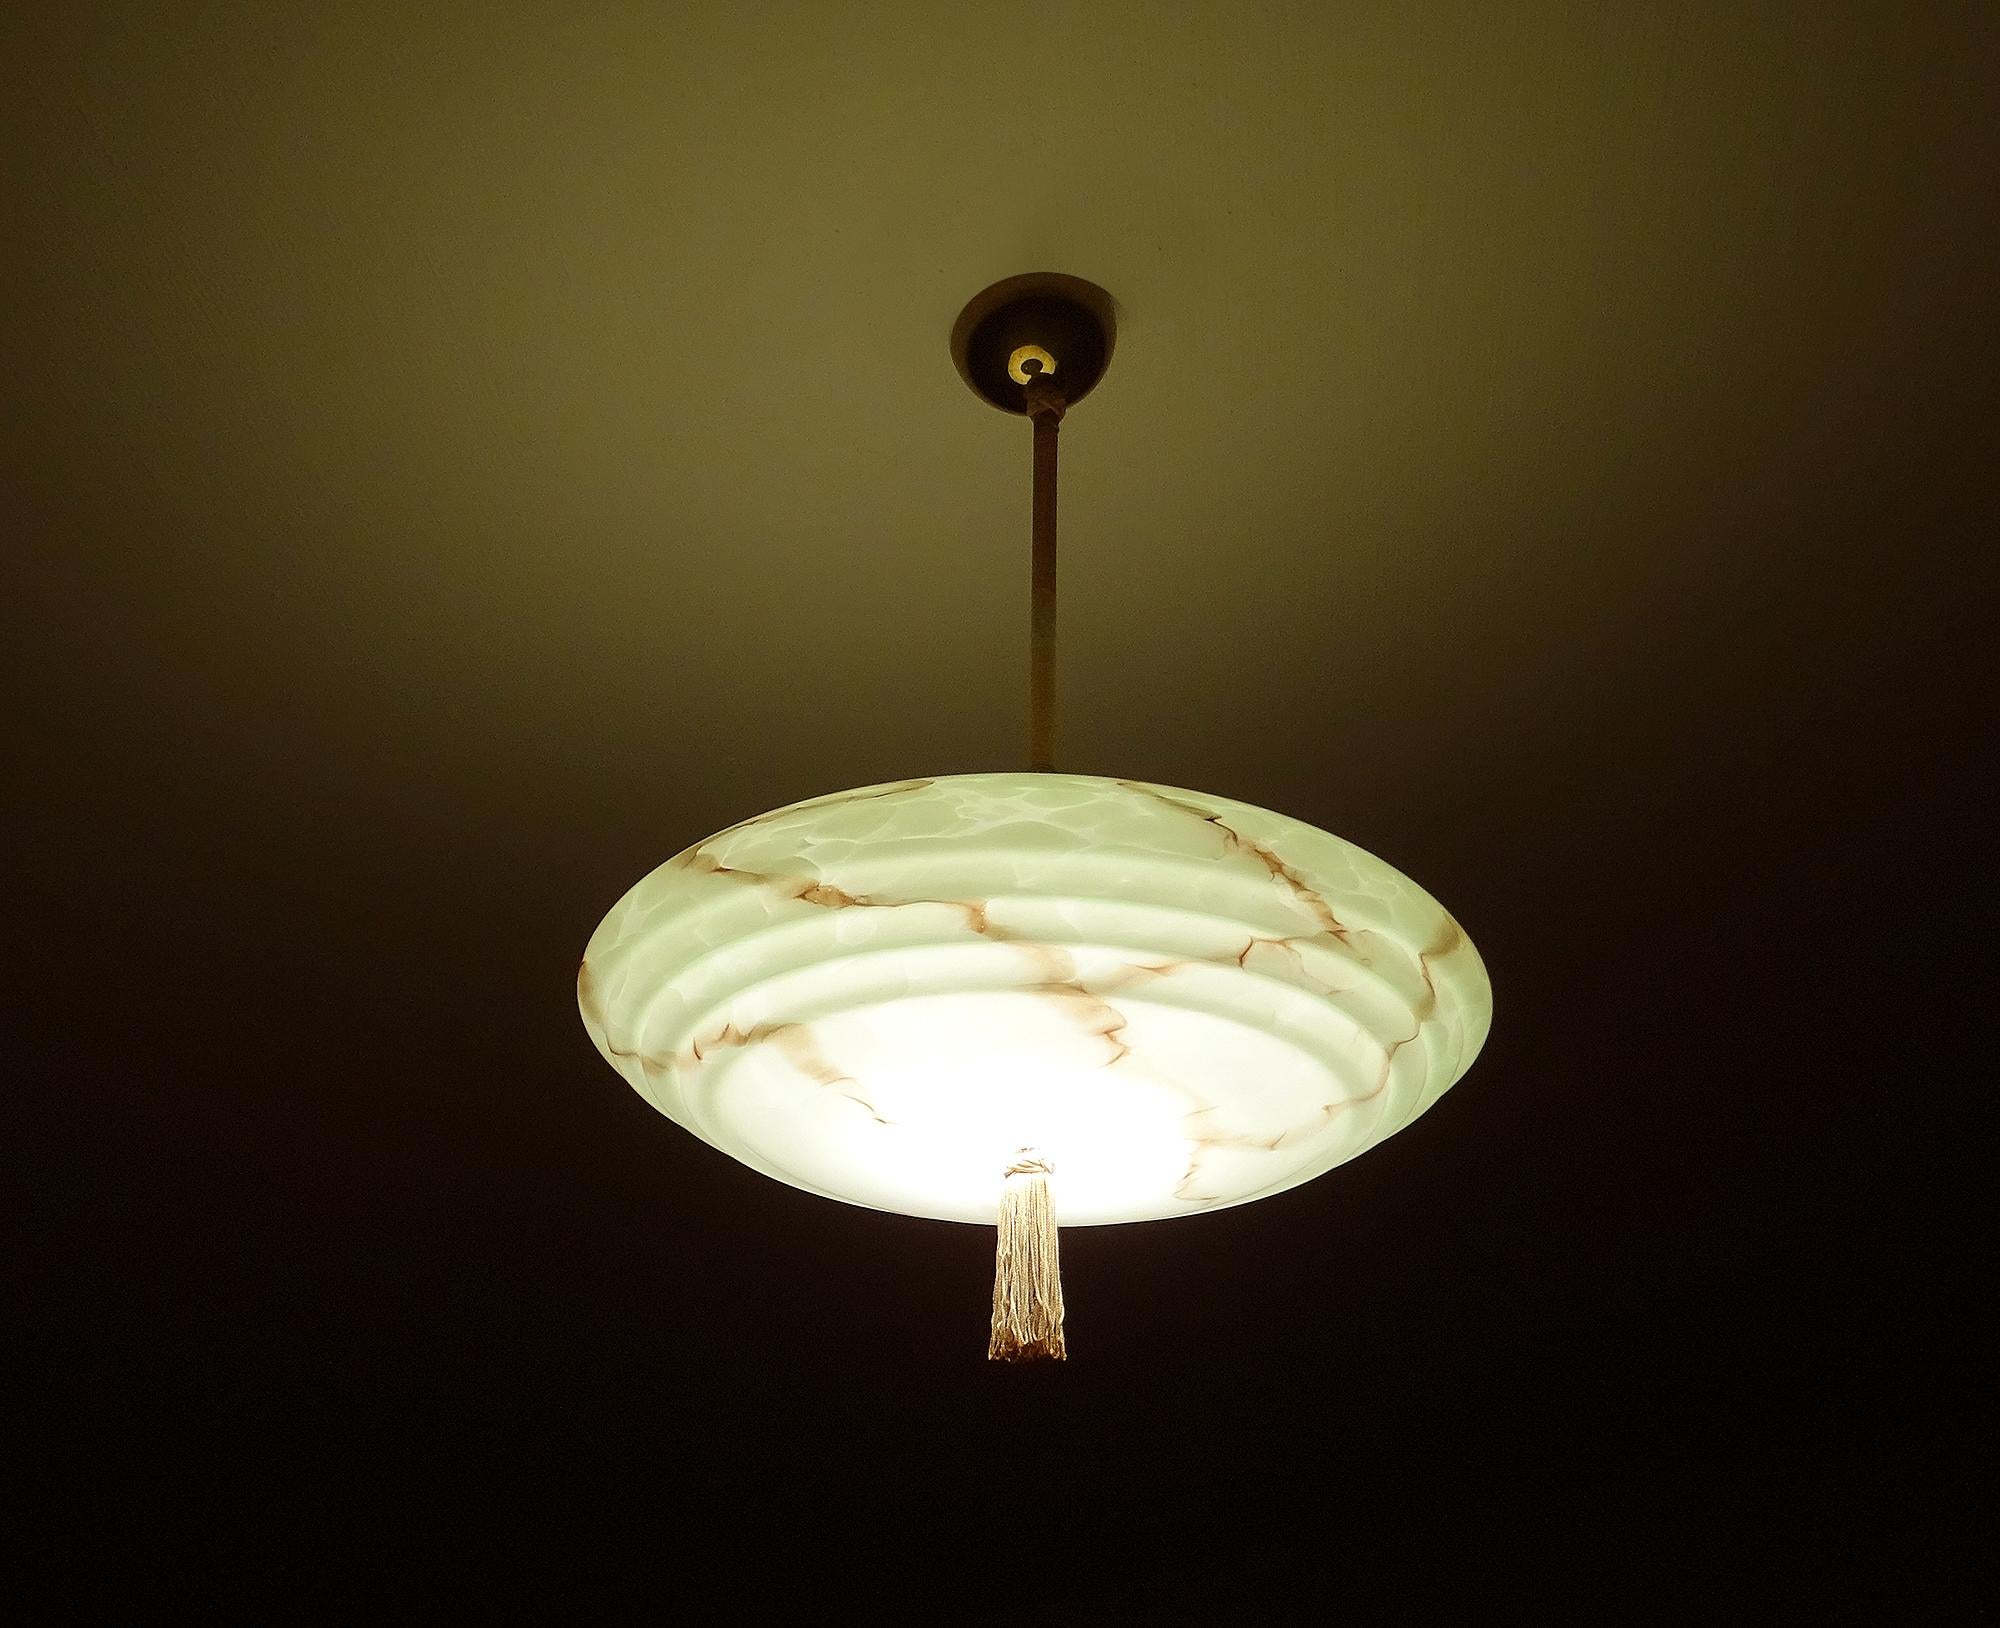 Very rare Art Deco pendant light with a stunning marbleized glass shade in UFO shape, brass stem and caps with tassel,
pole covered with thread emulating the colors of the shade
Wiring: The lamps have been tested with US American light bulbs under